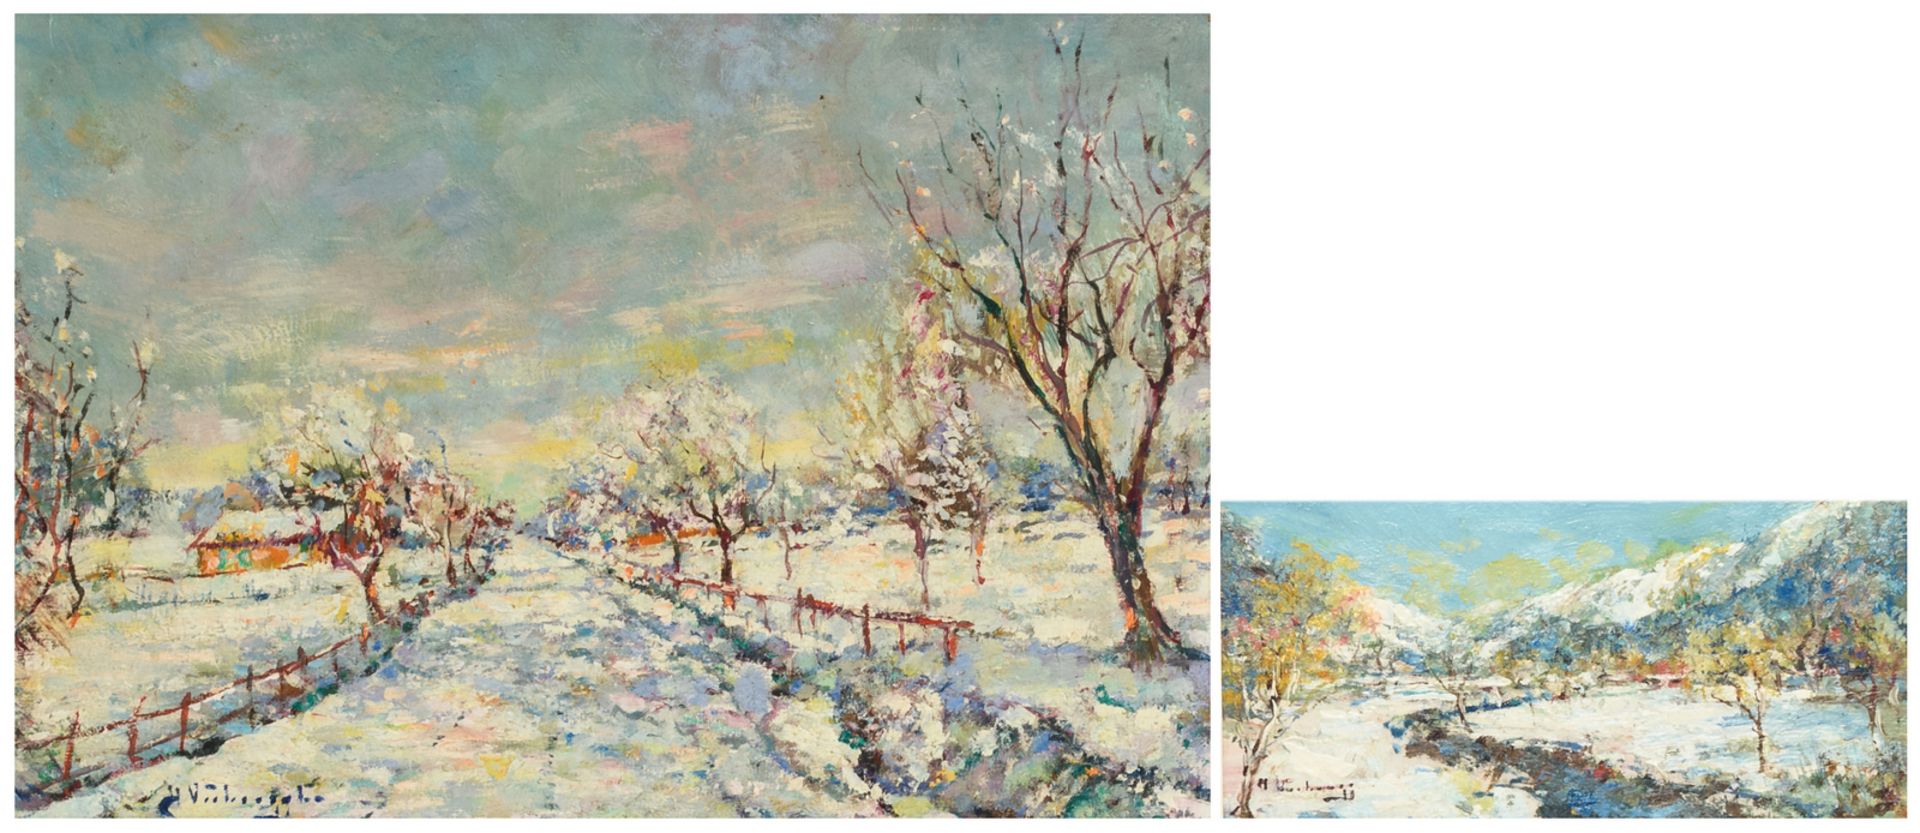 Verbrugghe C., 'Paysage D'Hyver' and a winter landscape, oil on board, 15 x 31 and 37,5 x 54,5 cm